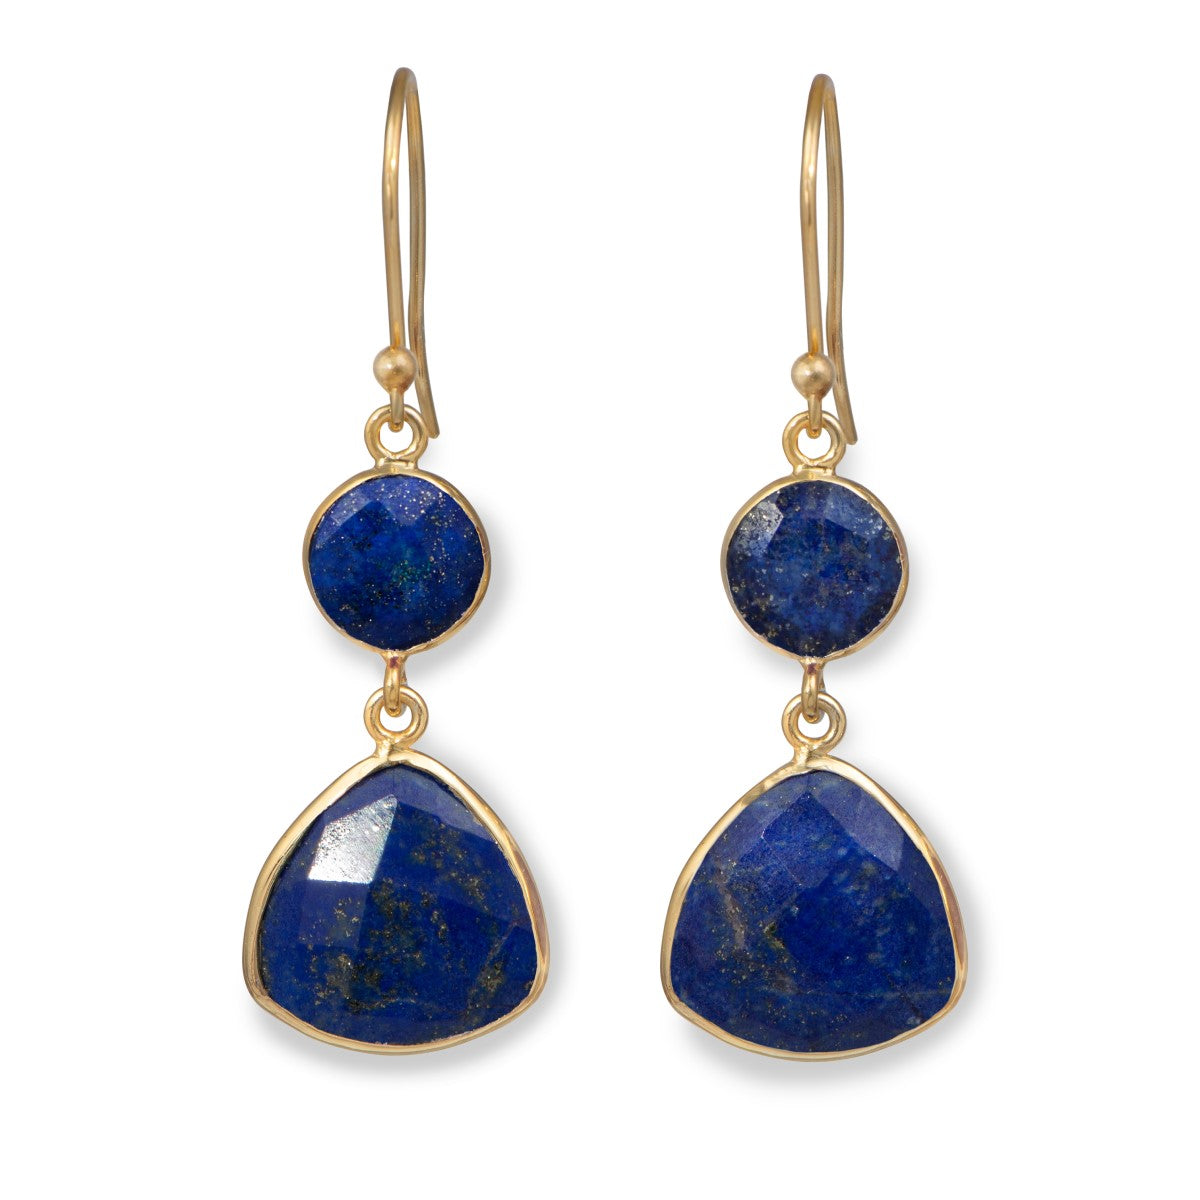 Lapis Lazuli Gemstone Earrings in Gold Plated Sterling Silver - Triangular